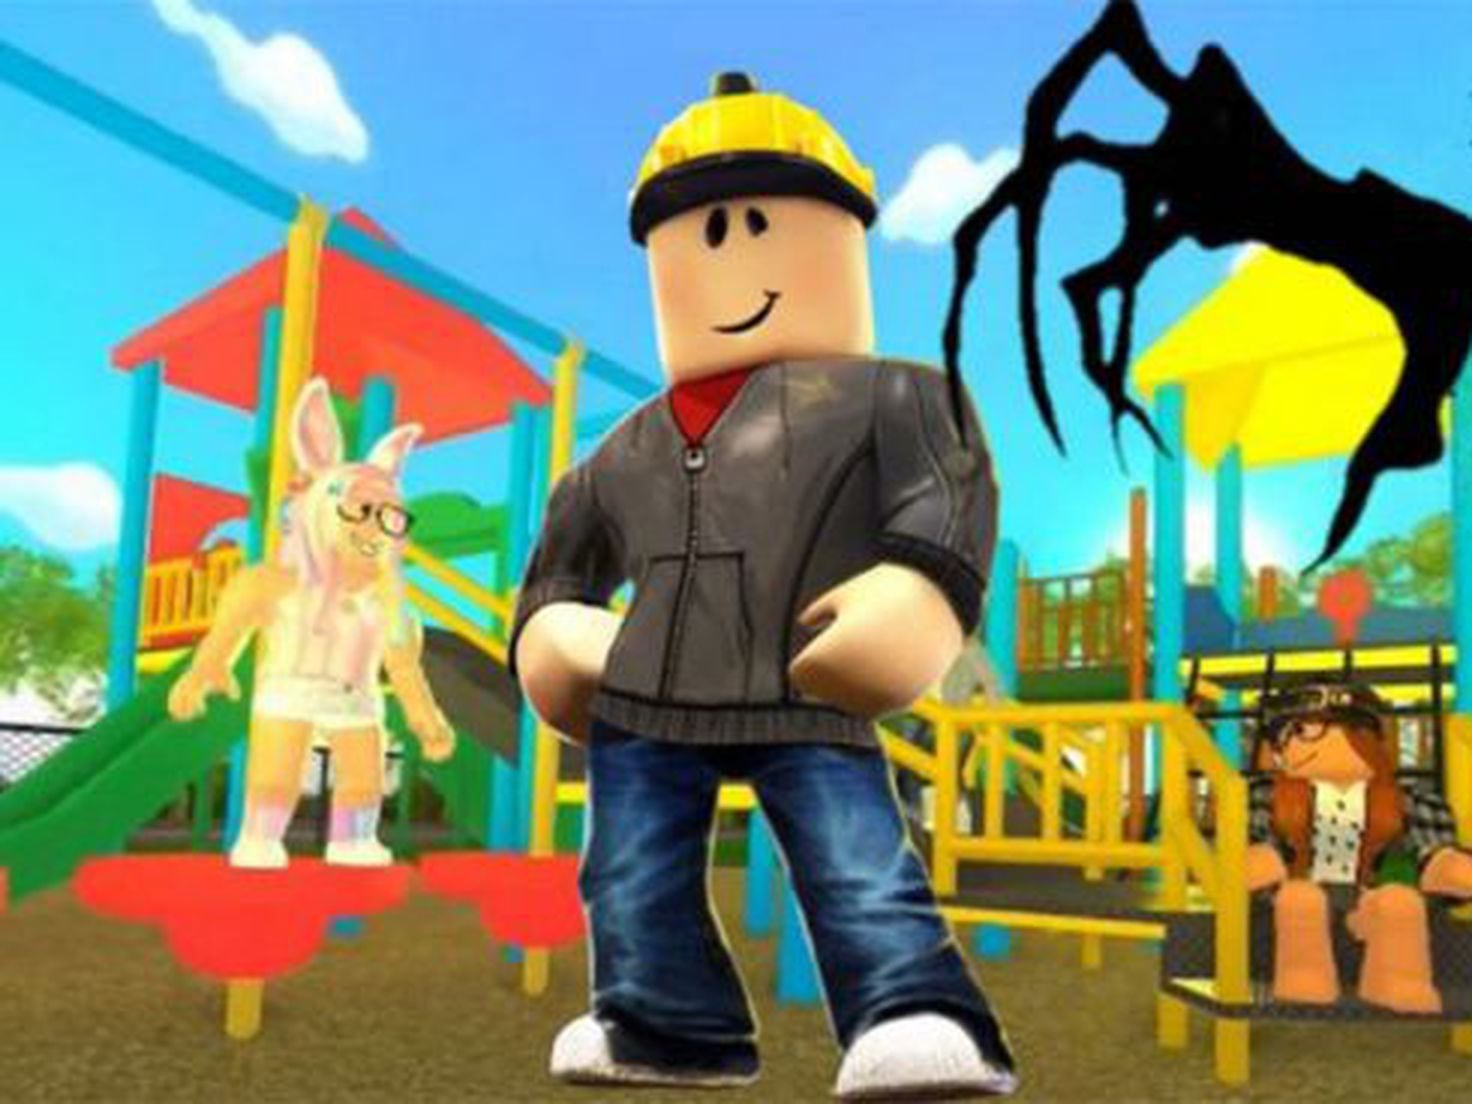 Free Roblox codes (May 2023); all free available promo codes - Meristation